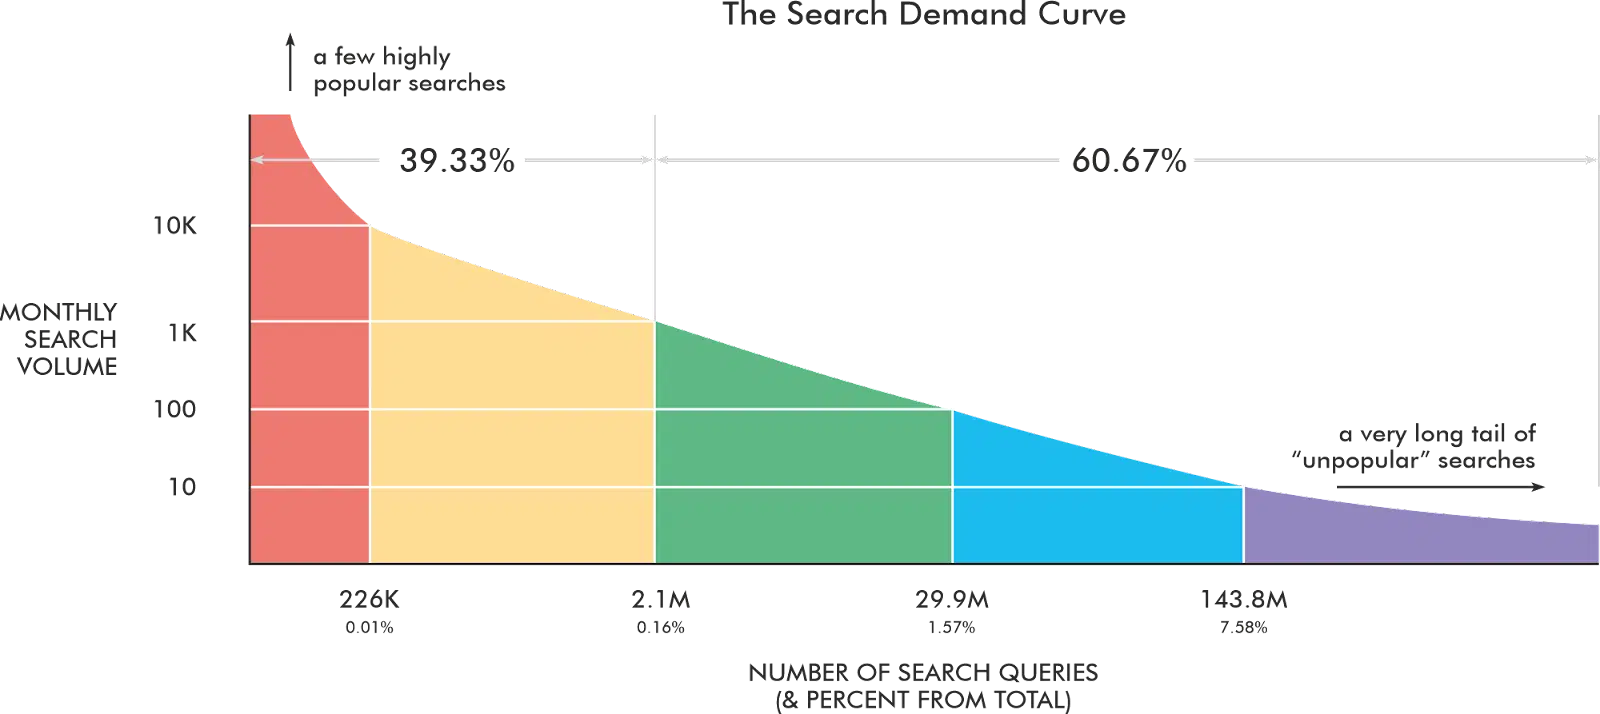 Redistribution of the search demand curve